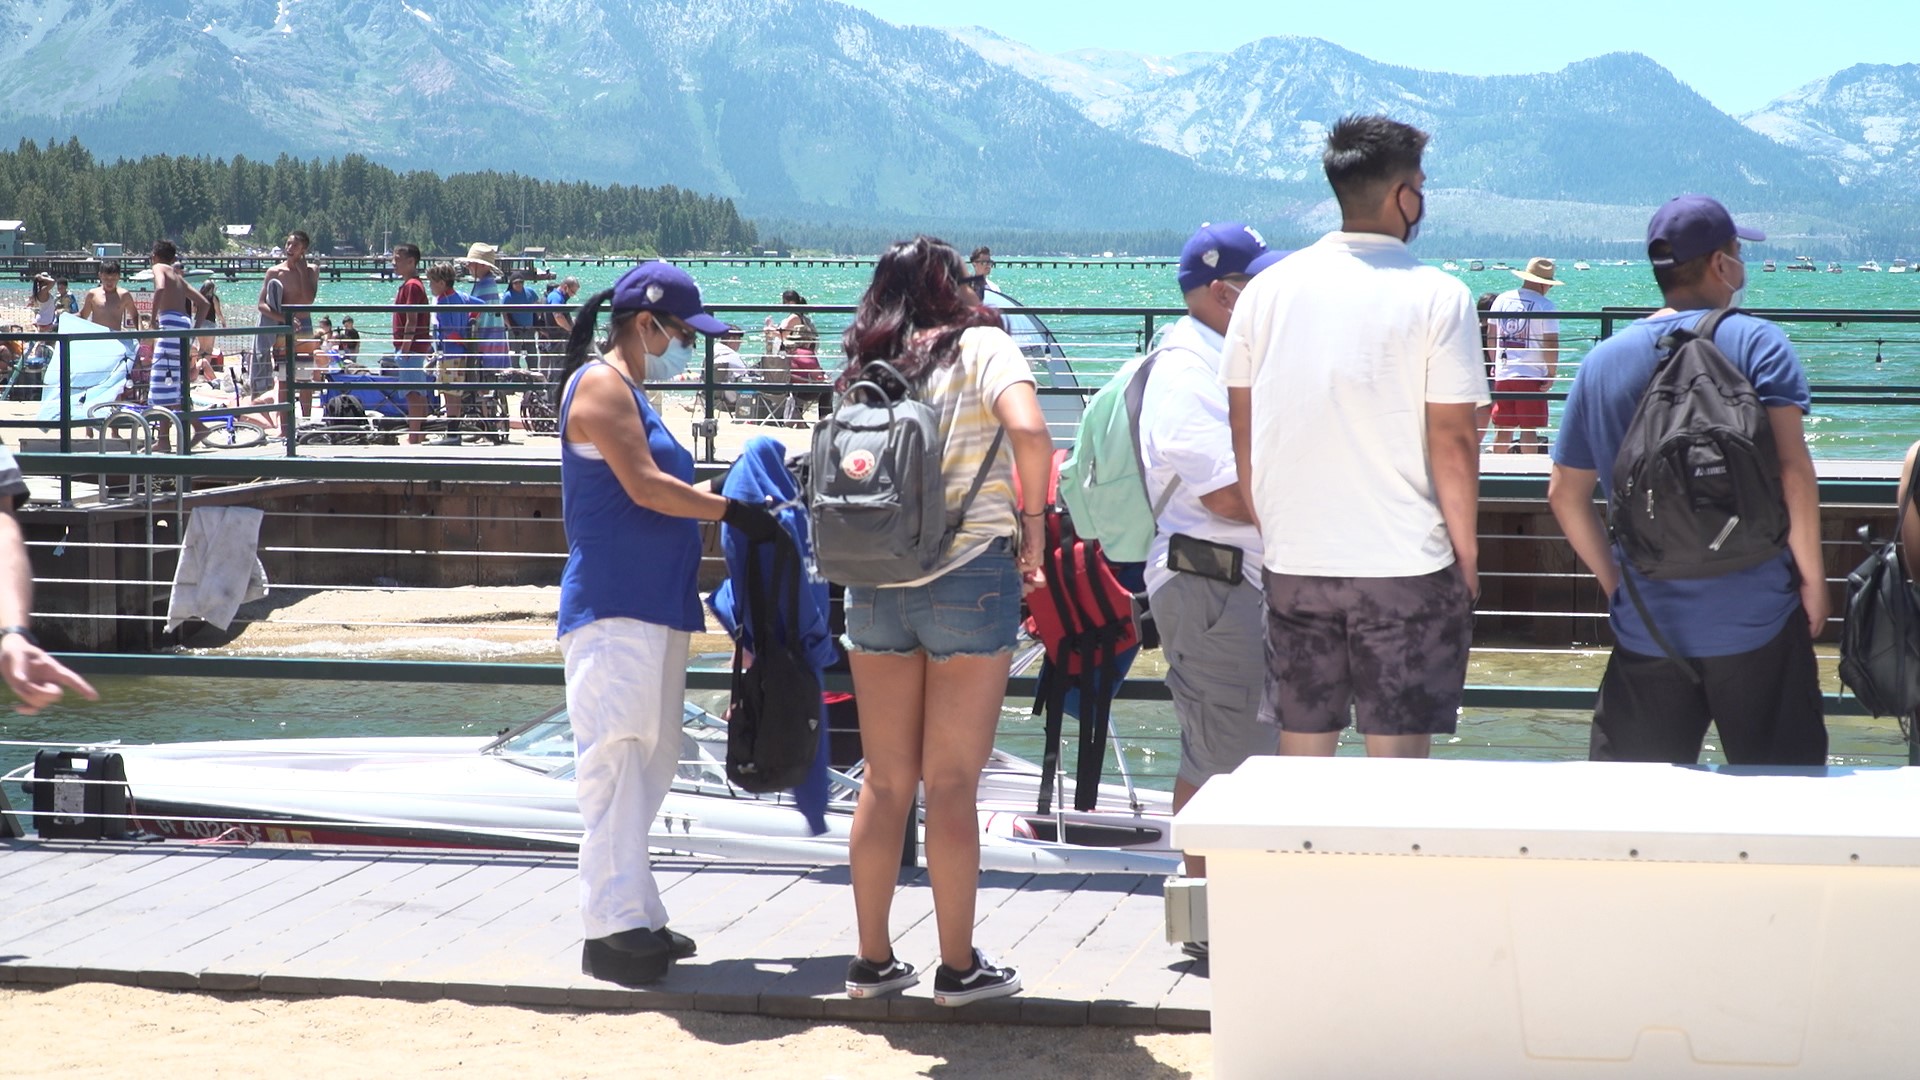 Despite canceling the Fourth of July firework shows due to the coronavirus pandemic, Tahoe Park officials are already seeing a massive influx of visitors.